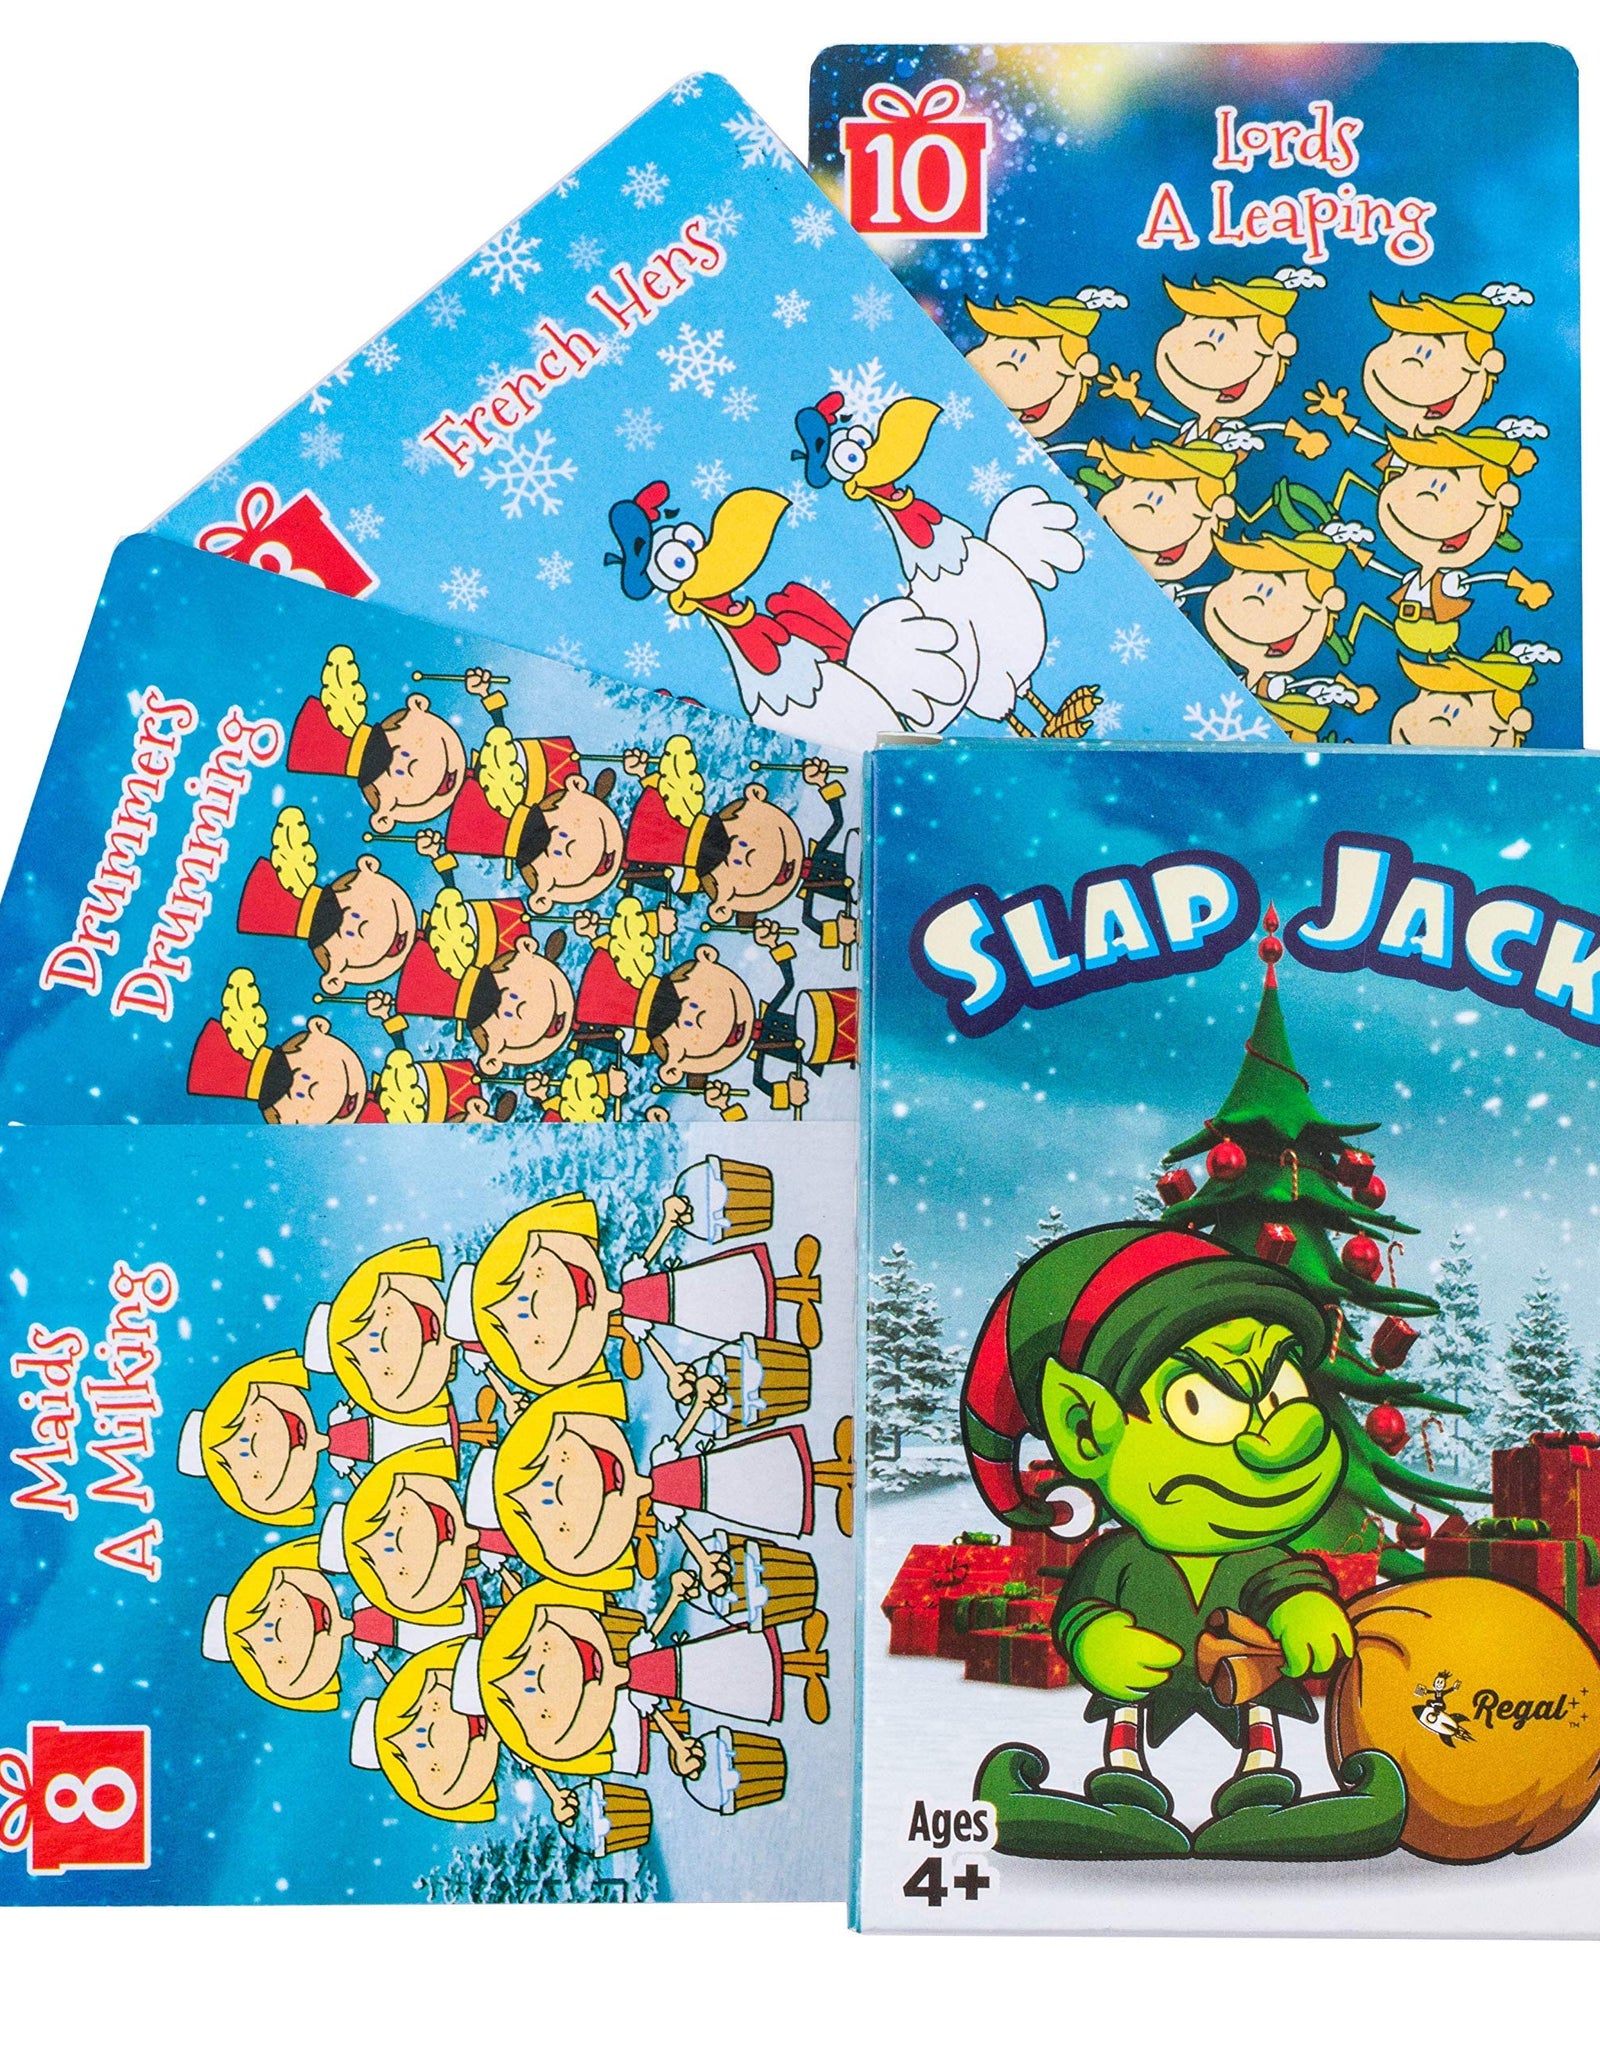 Classic Card Games - Games Included May Vary - Includes Old Maid, Go Fish, Slapjack, Crazy 8's, War, and (Silly Monster Memory Match or Banapples Jr) (All 6 Games)